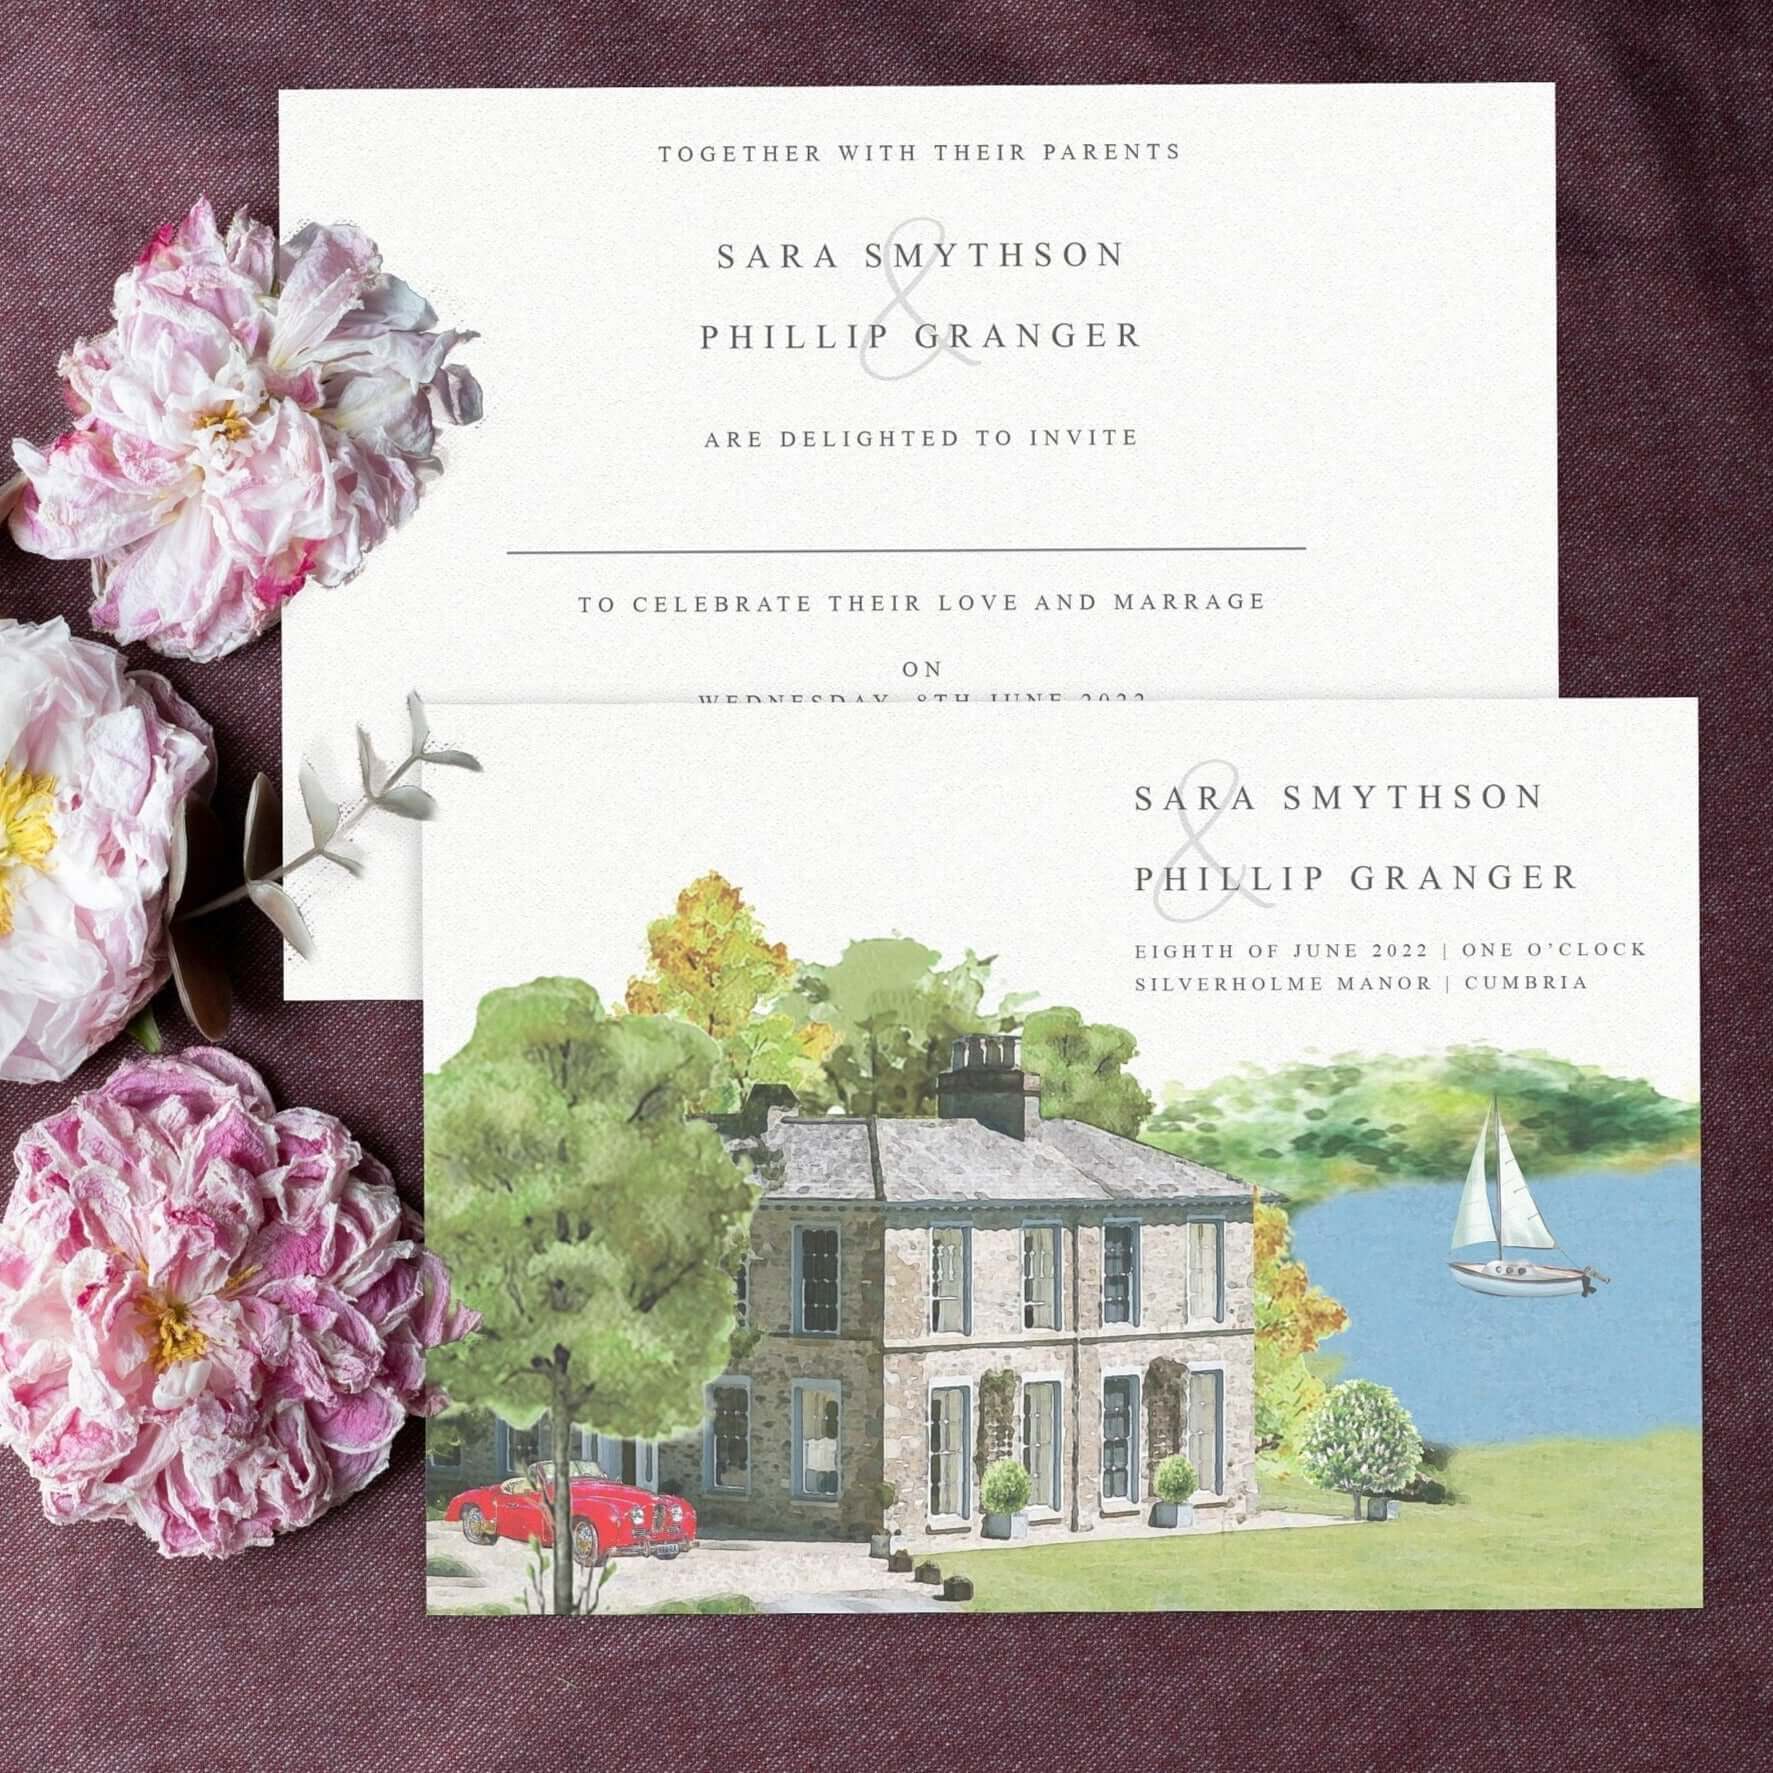 Illustrated wedding invitation featuring a watercolour painting of Silverholme Manor with a lake and sailing boat. Wedding Stationery from Mustard and Gray